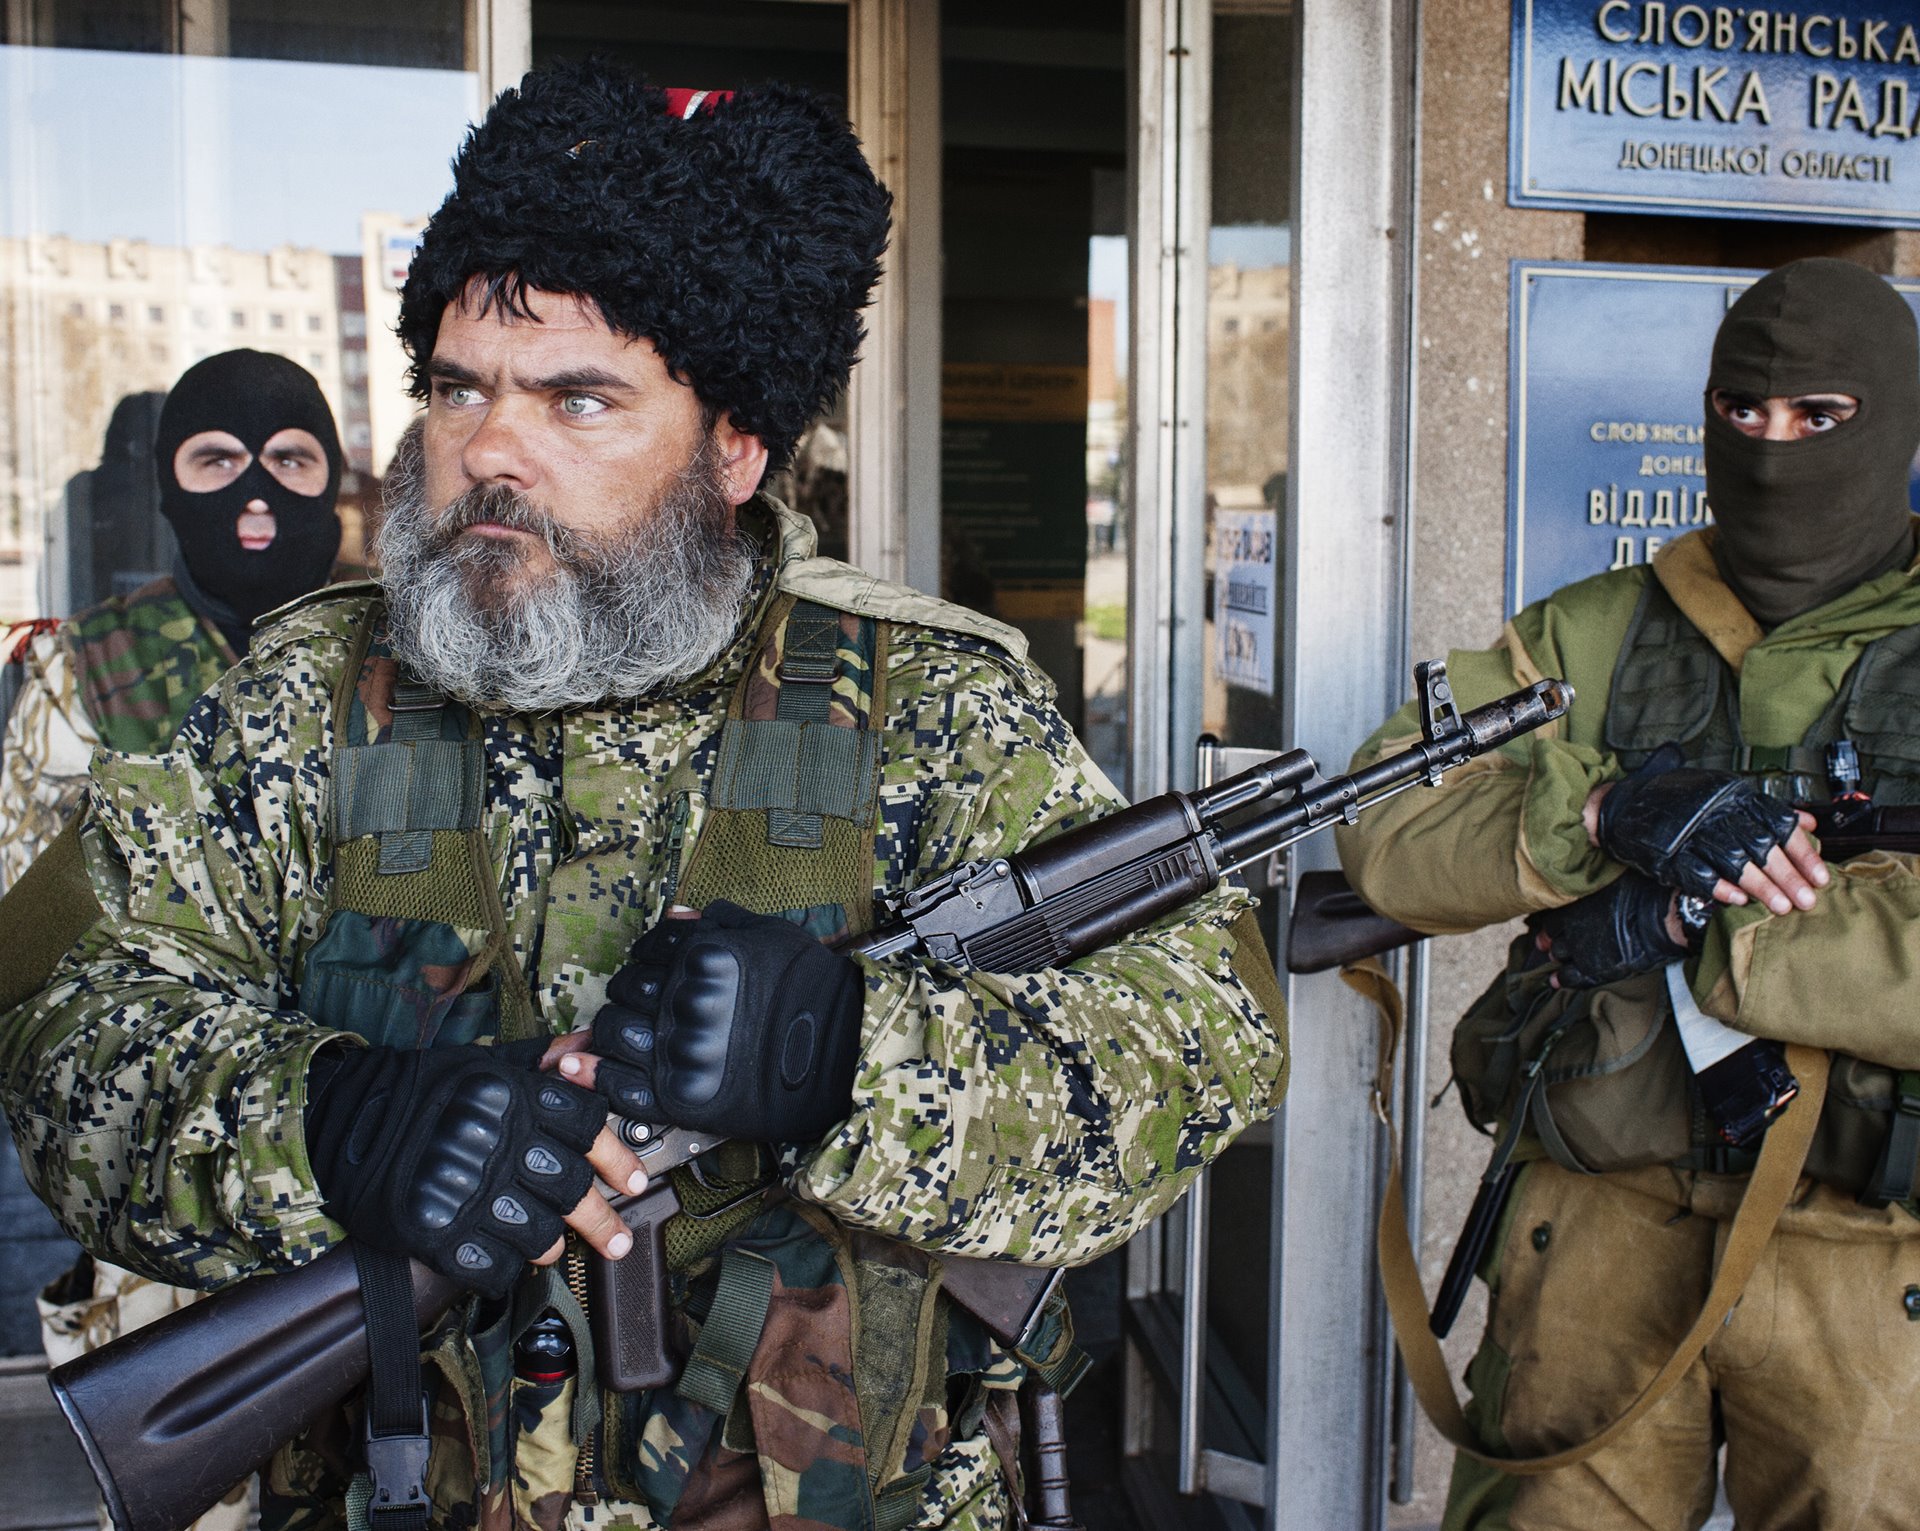 A man stands guard at &nbsp;the entrance to the Slovyansk Town Hall, which had been occupied by separatist forces, in Slovyansk, Ukraine.&nbsp;